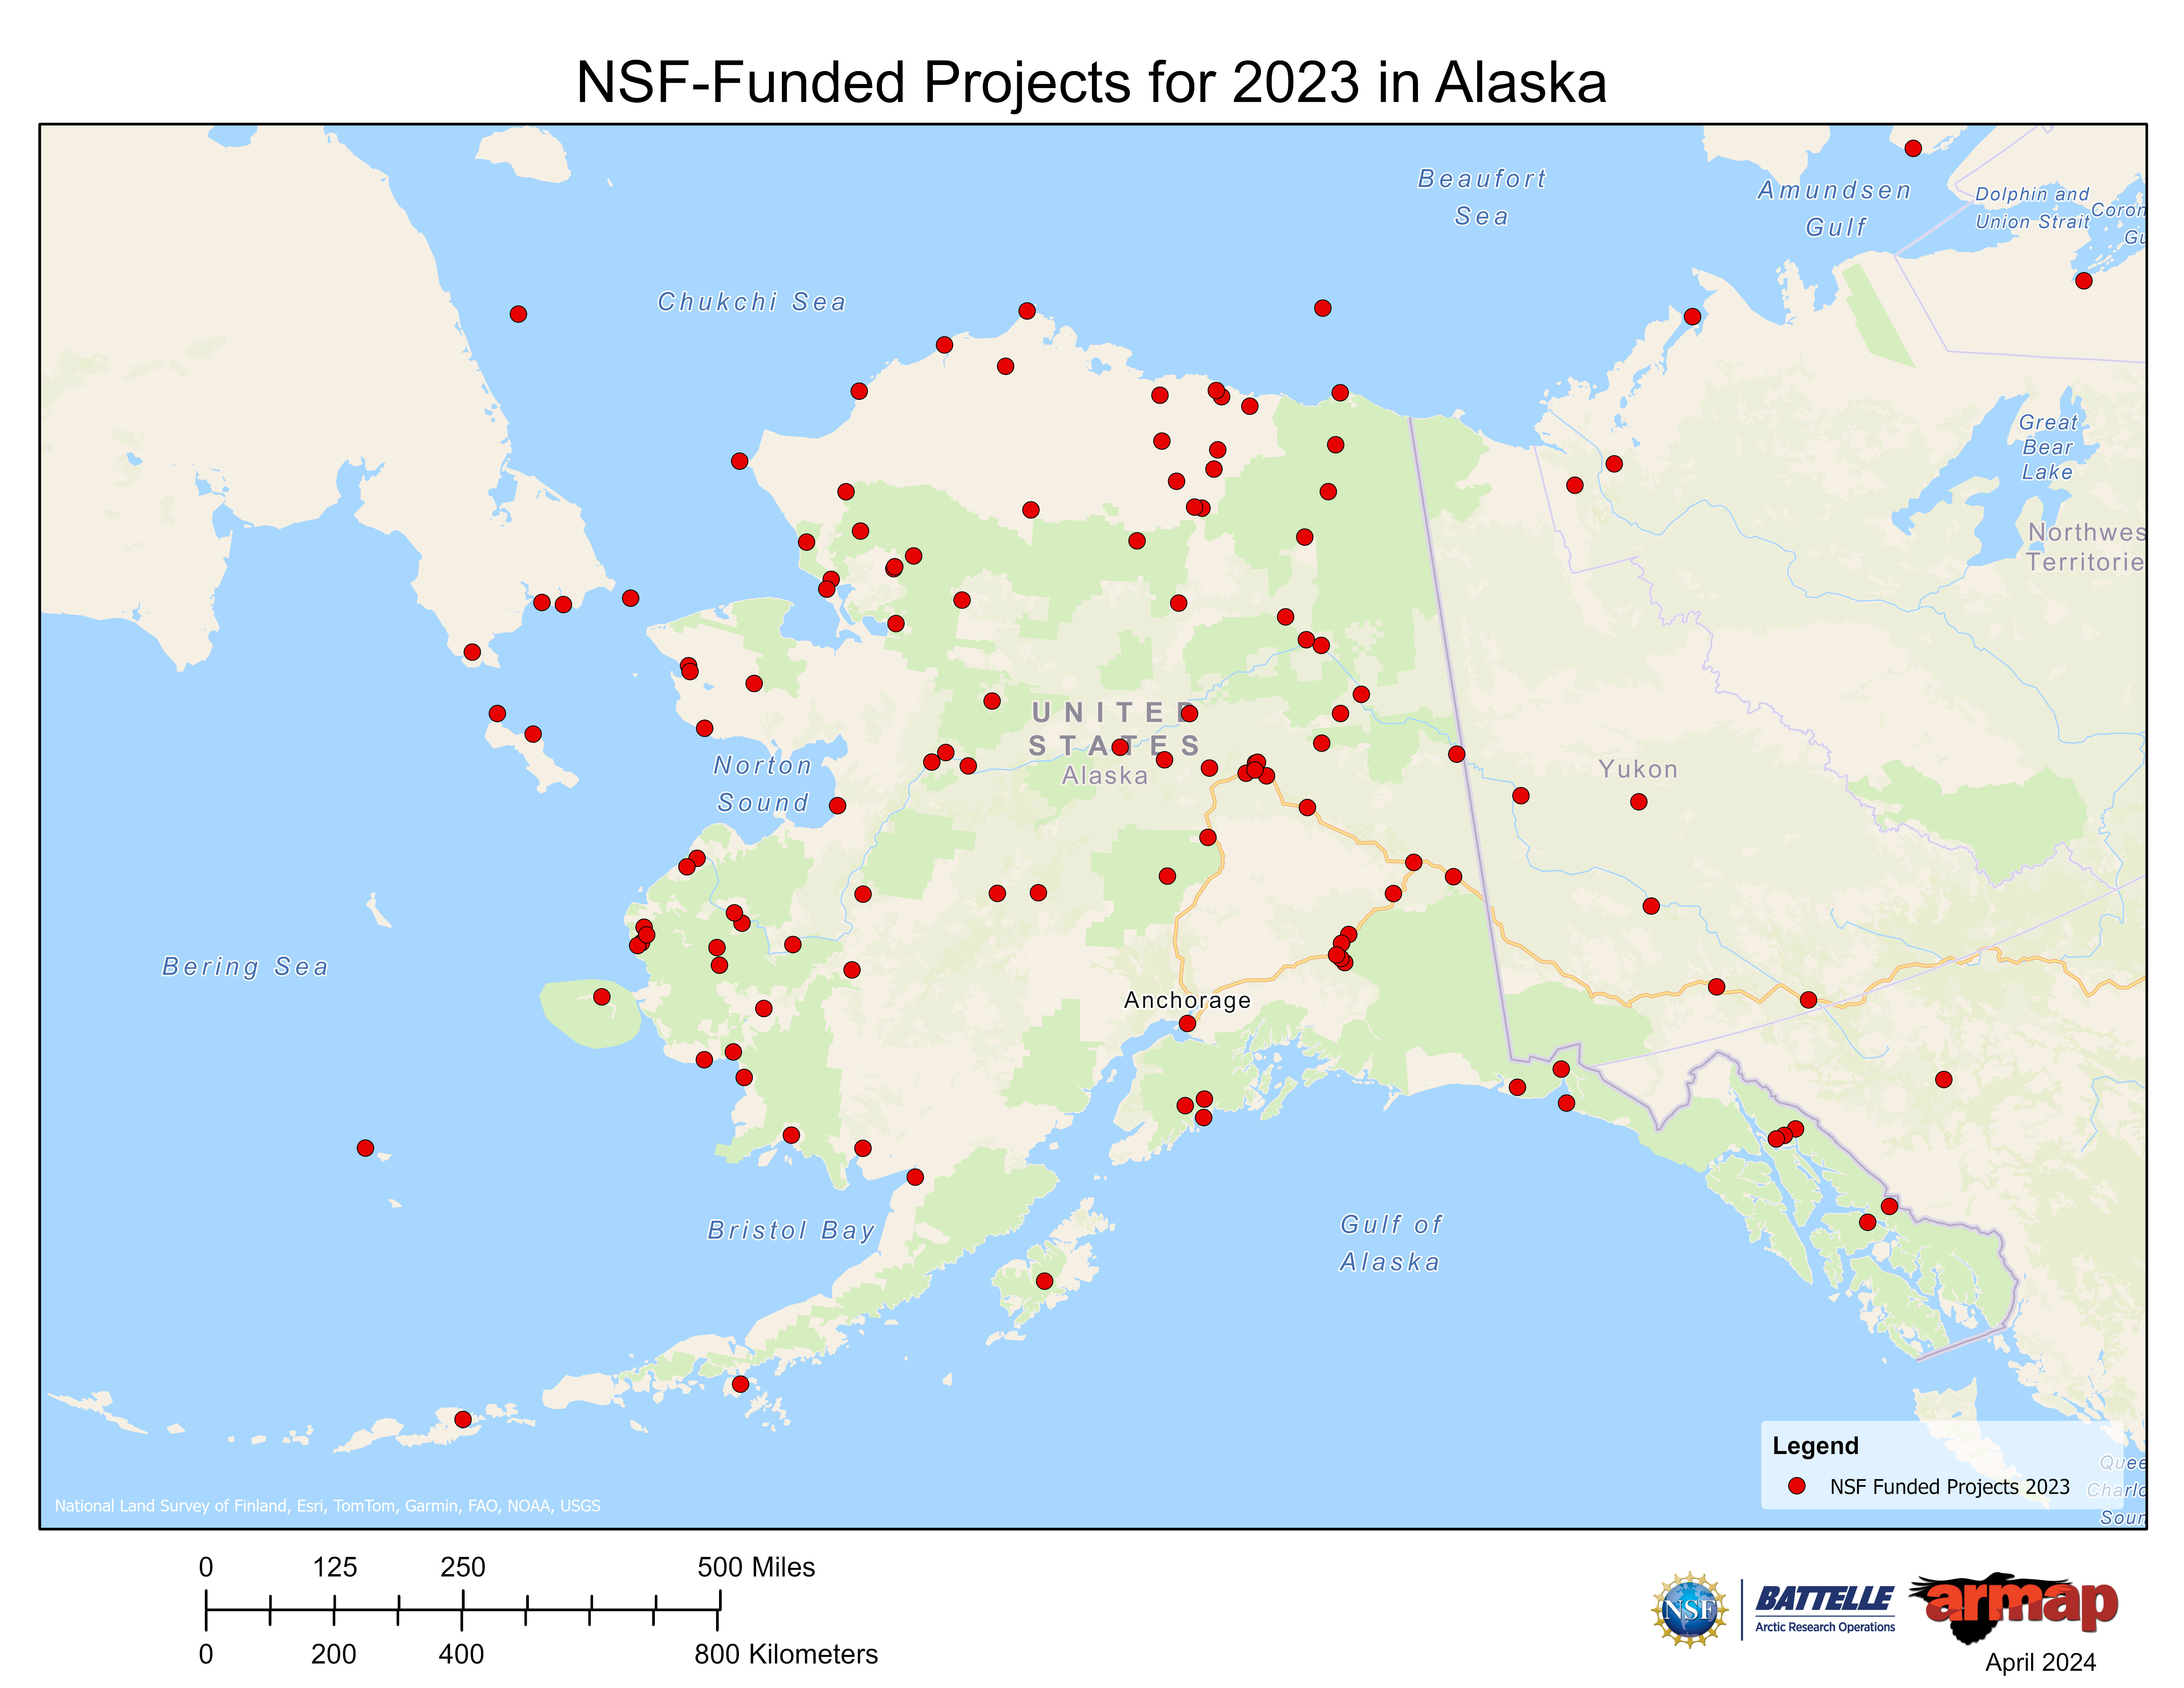 NSF-Funded Projects in Alaska for the Past Year